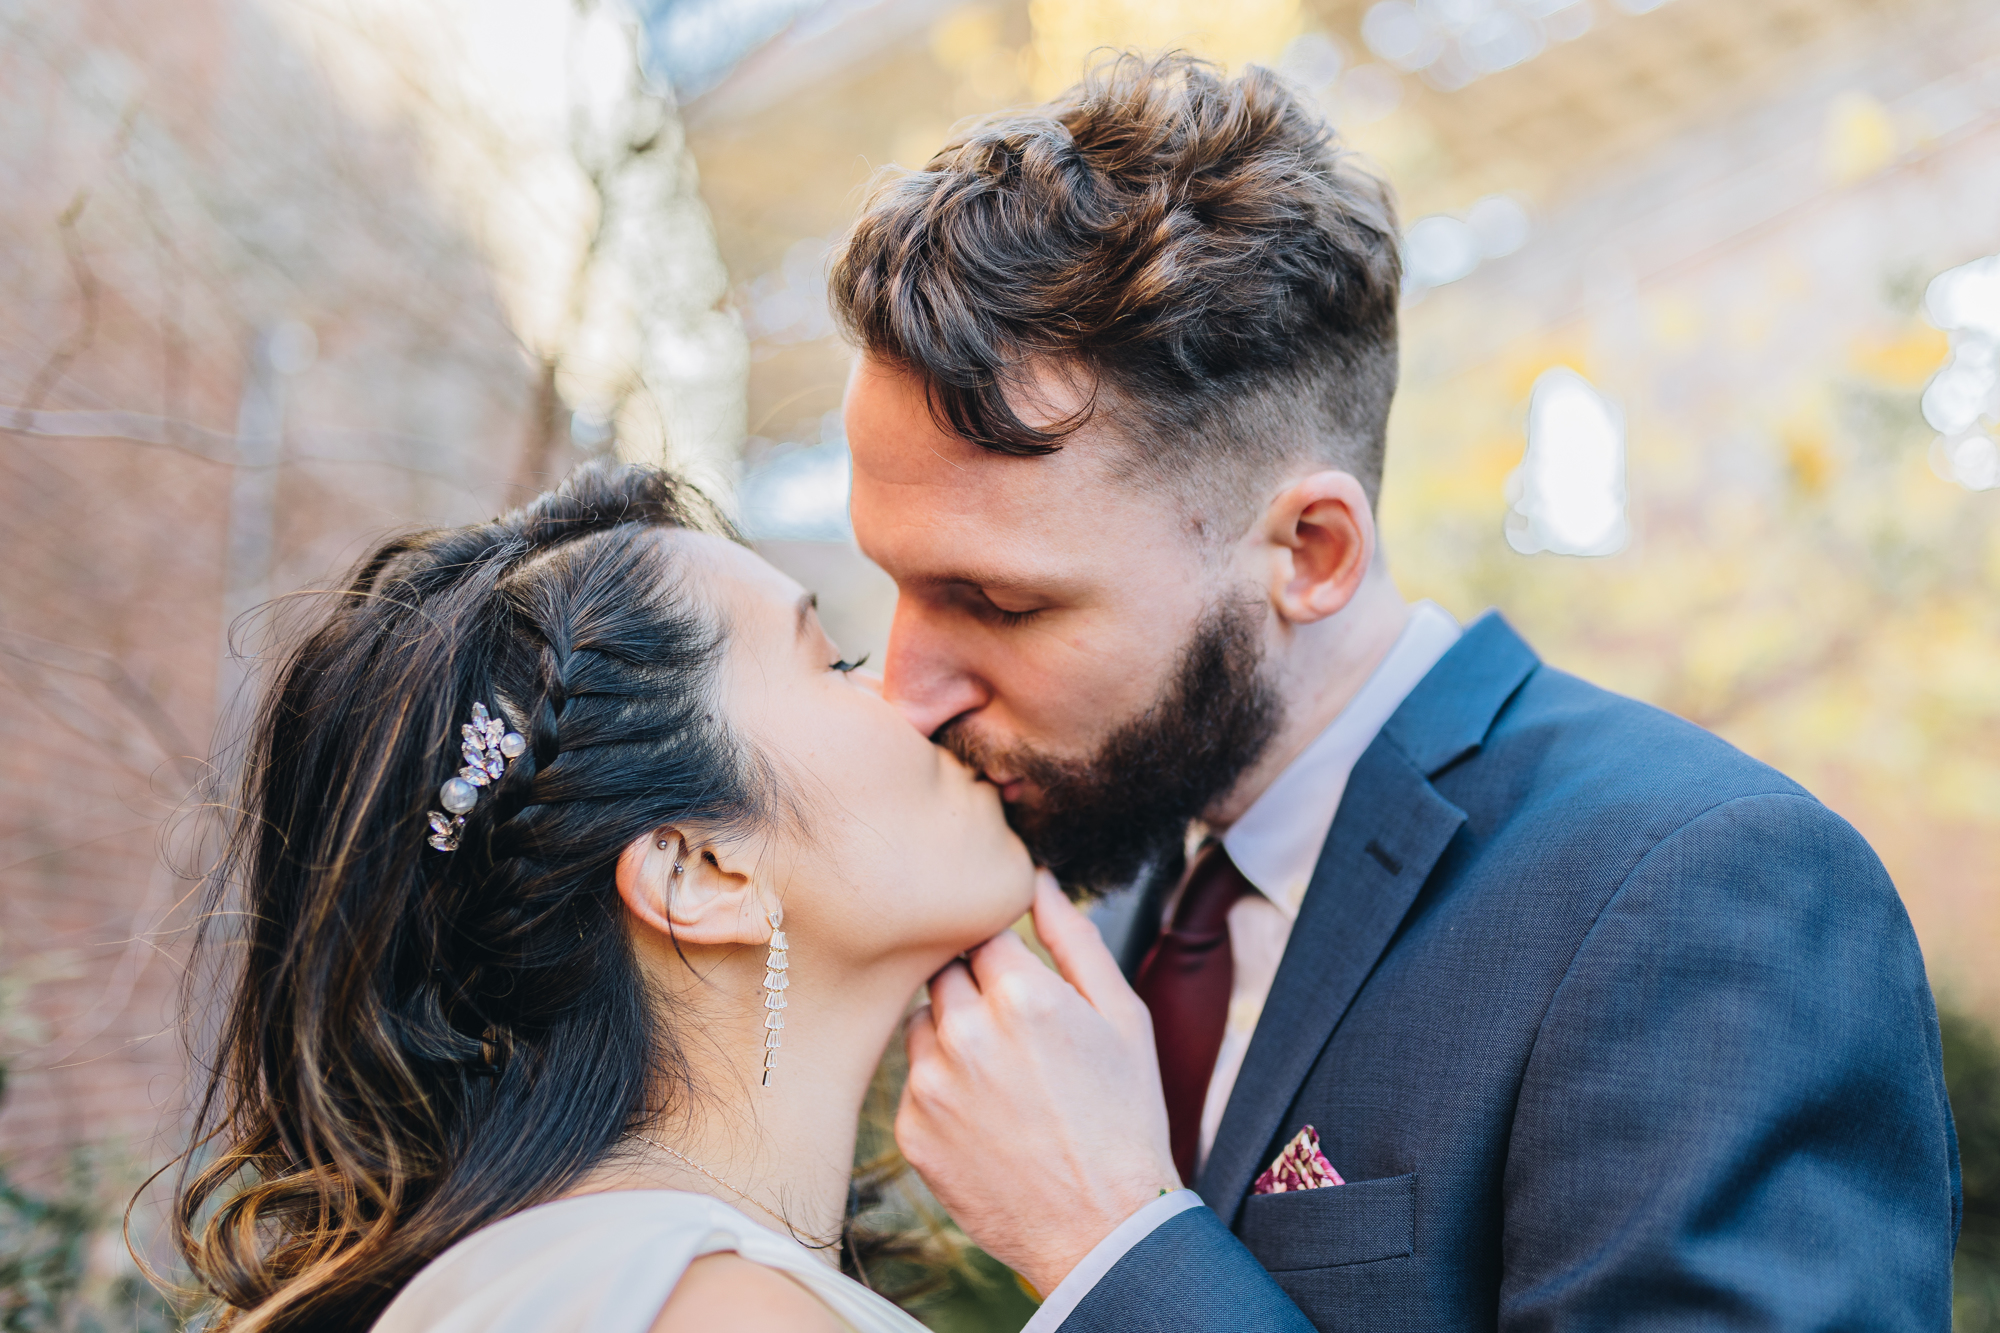 Fun Fall DUMBO Elopement with New York views and foliage